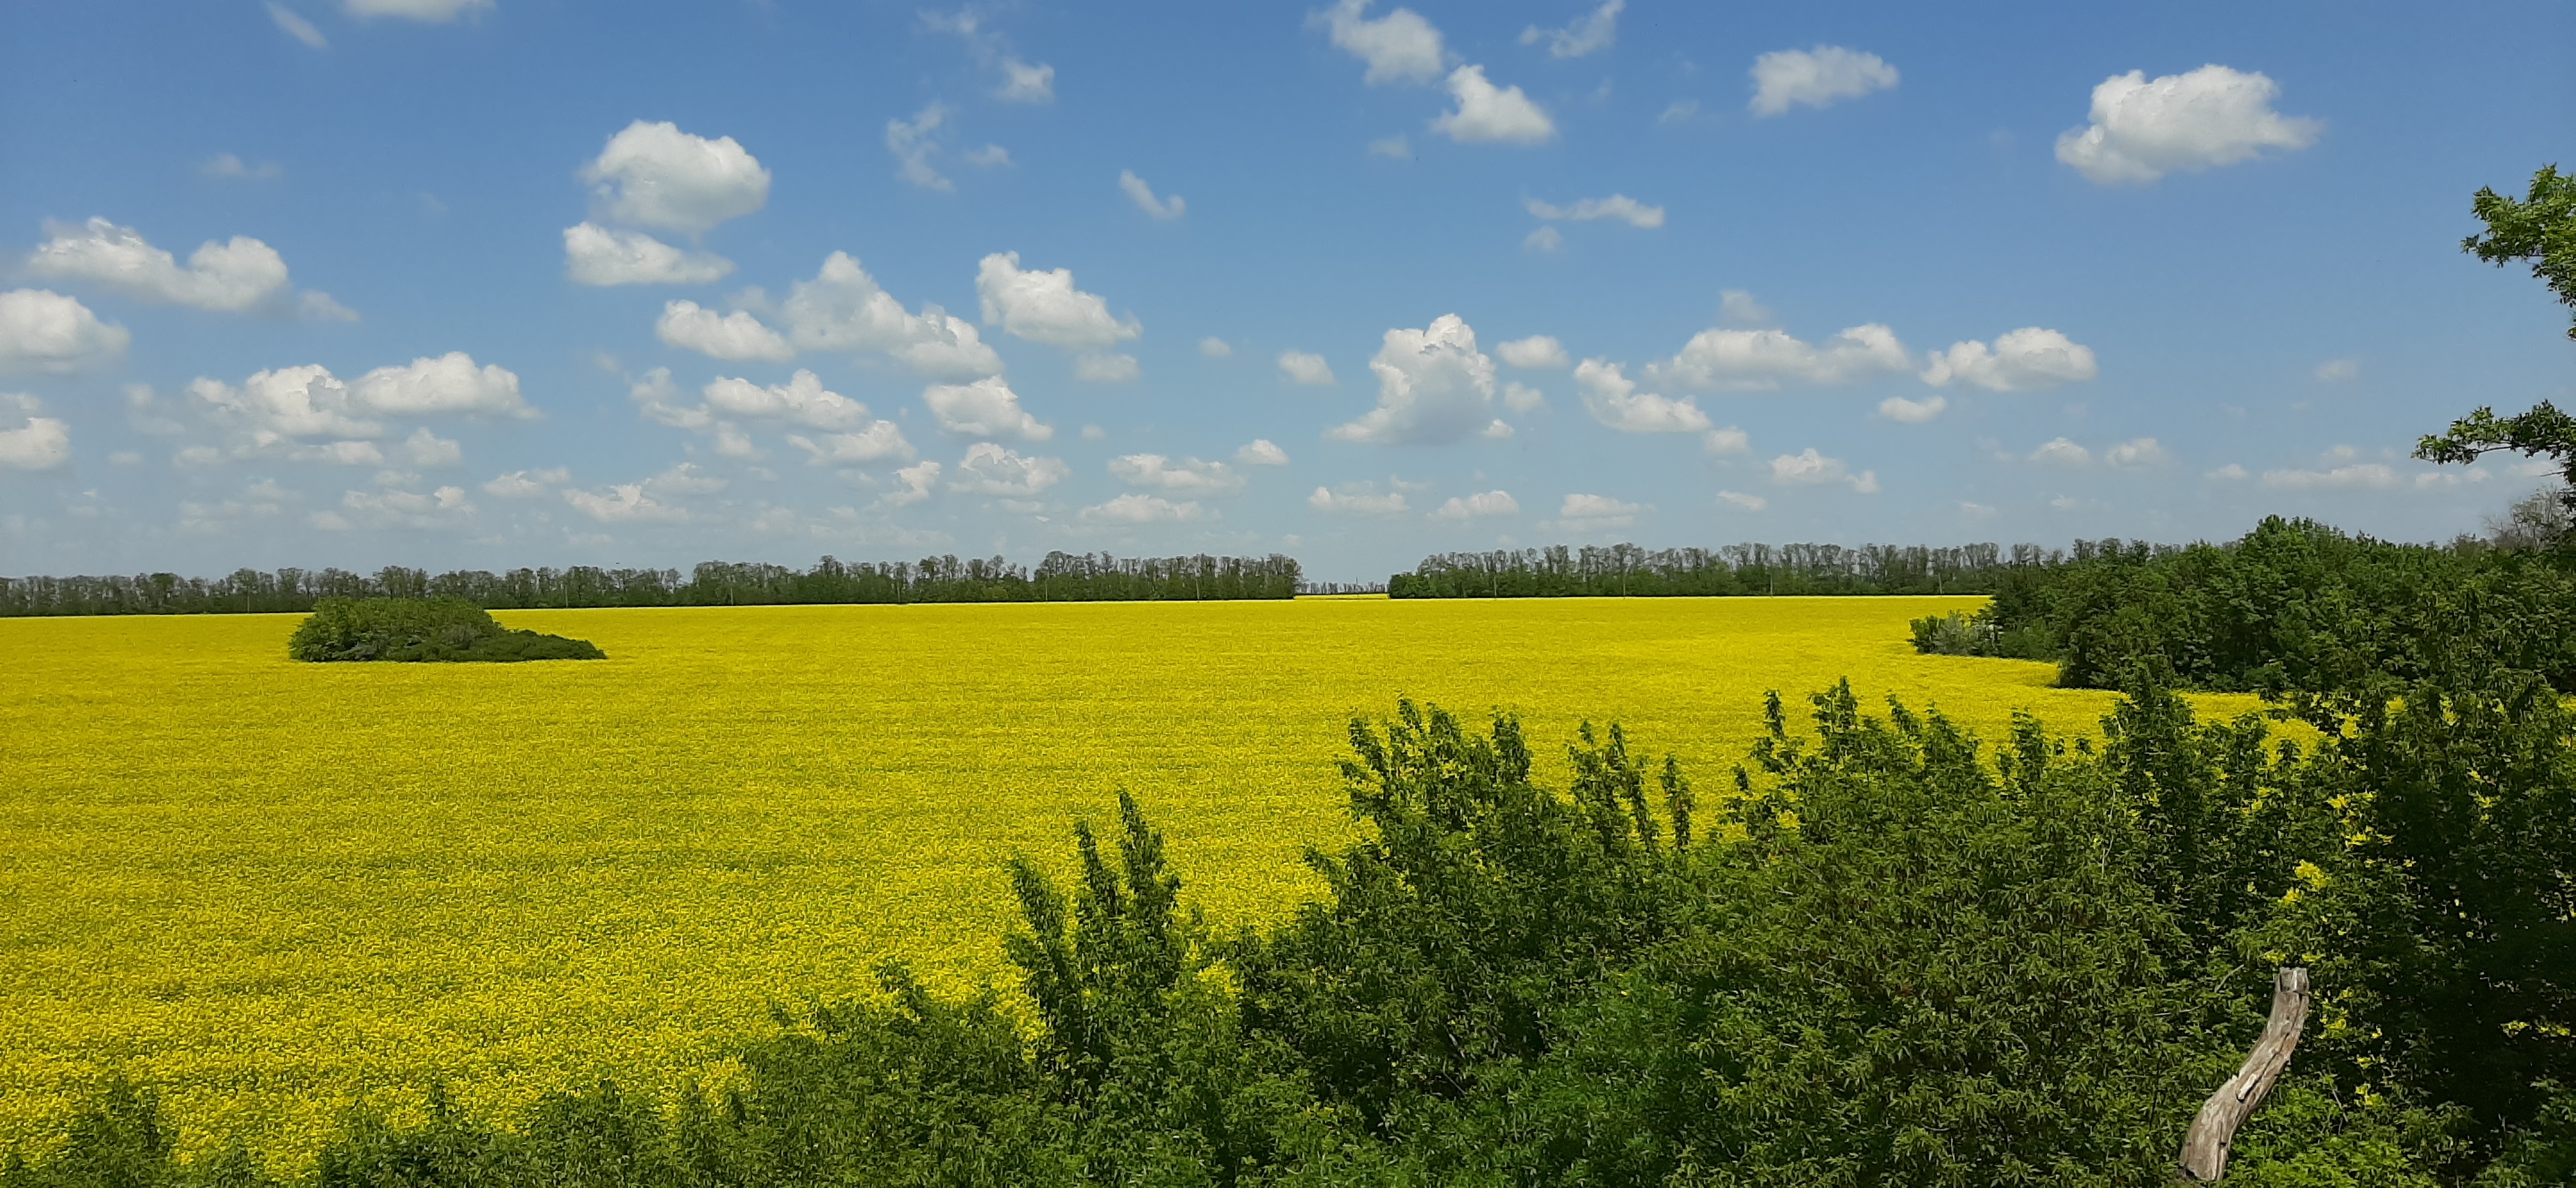 Late spring fields